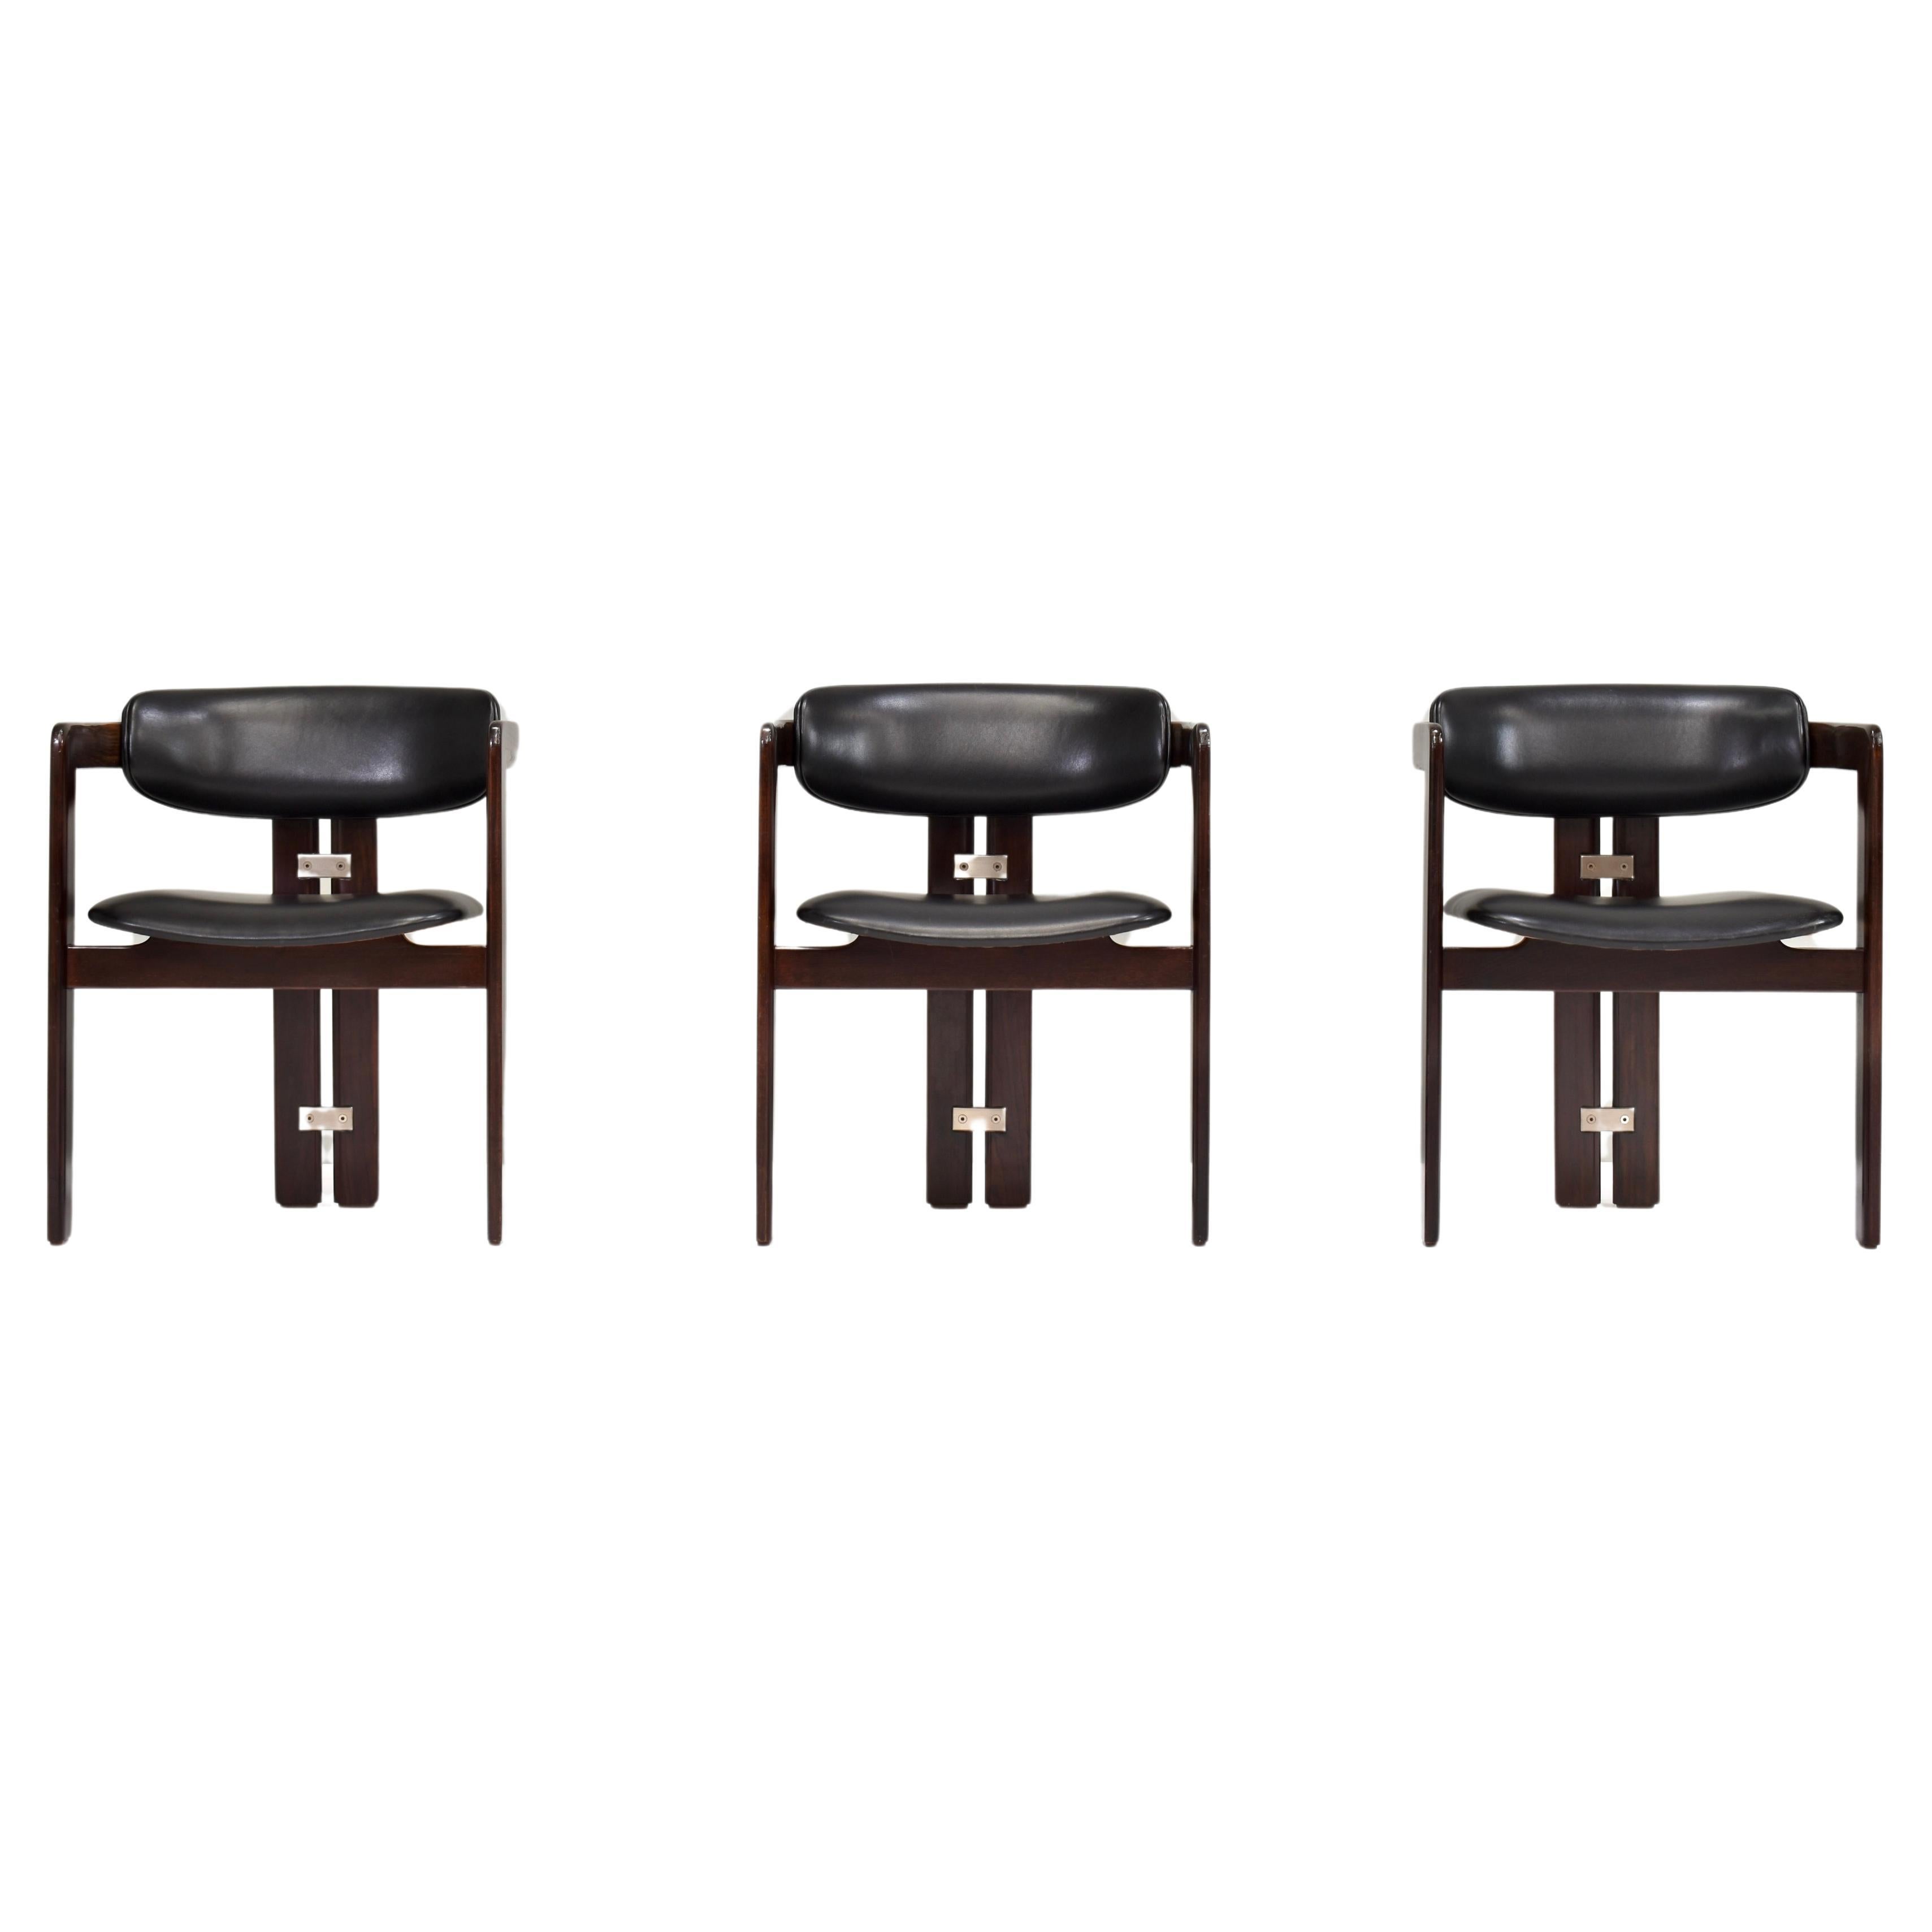 Pamplona Chairs by Augusti Savini in Black Leather - Italy, 1965, Set of 3  For Sale